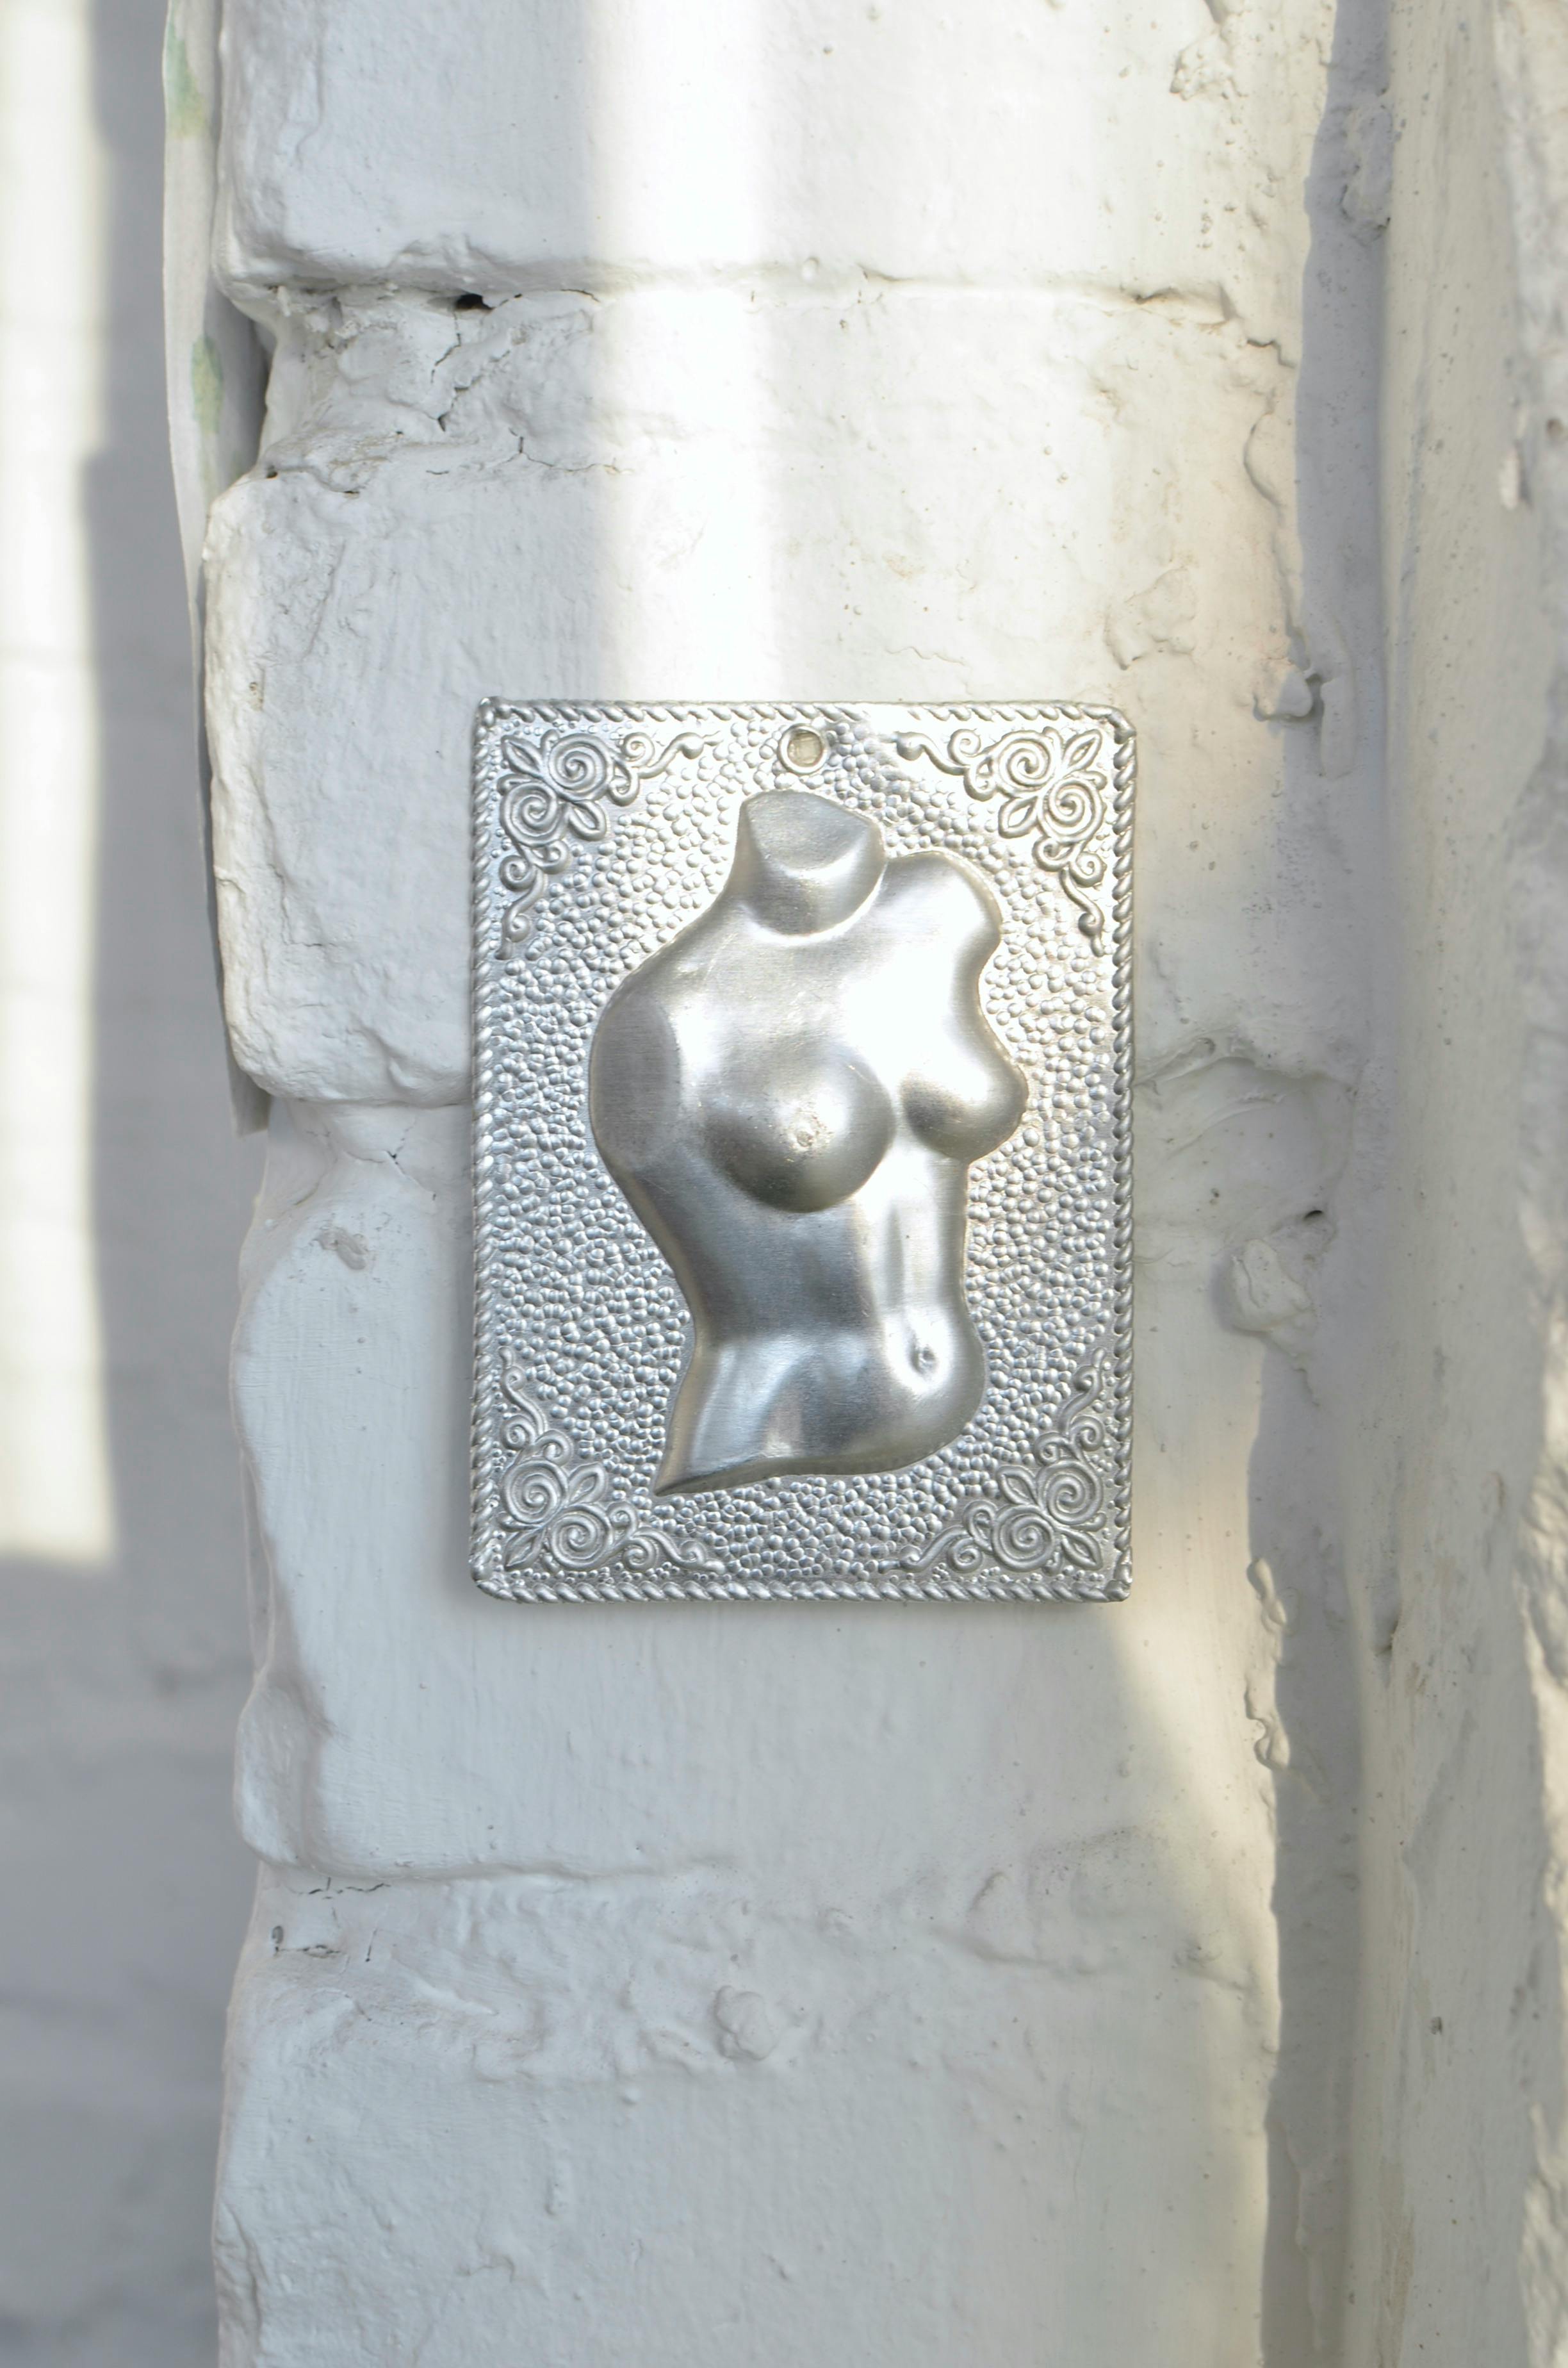 engraving representing nude female torso on rough wall